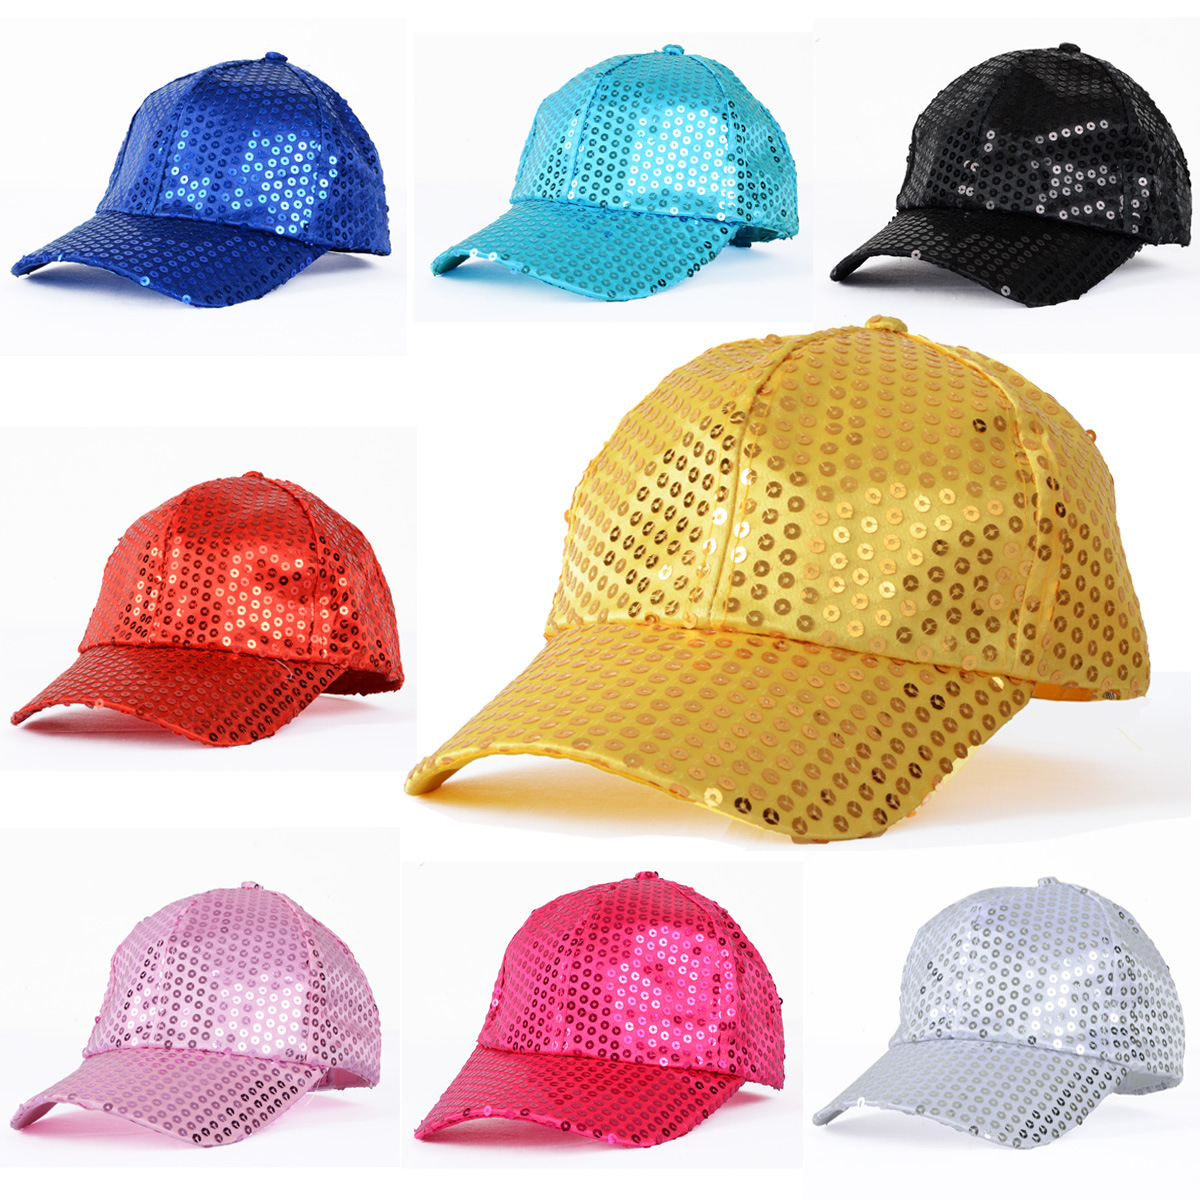 

50pcs/Lot Women Men Shining Sequin Baseball Hat Sequined Glitter Dance Party Cap Clubwear Costume Cosplay Performance Hat Adjustable Size, Red